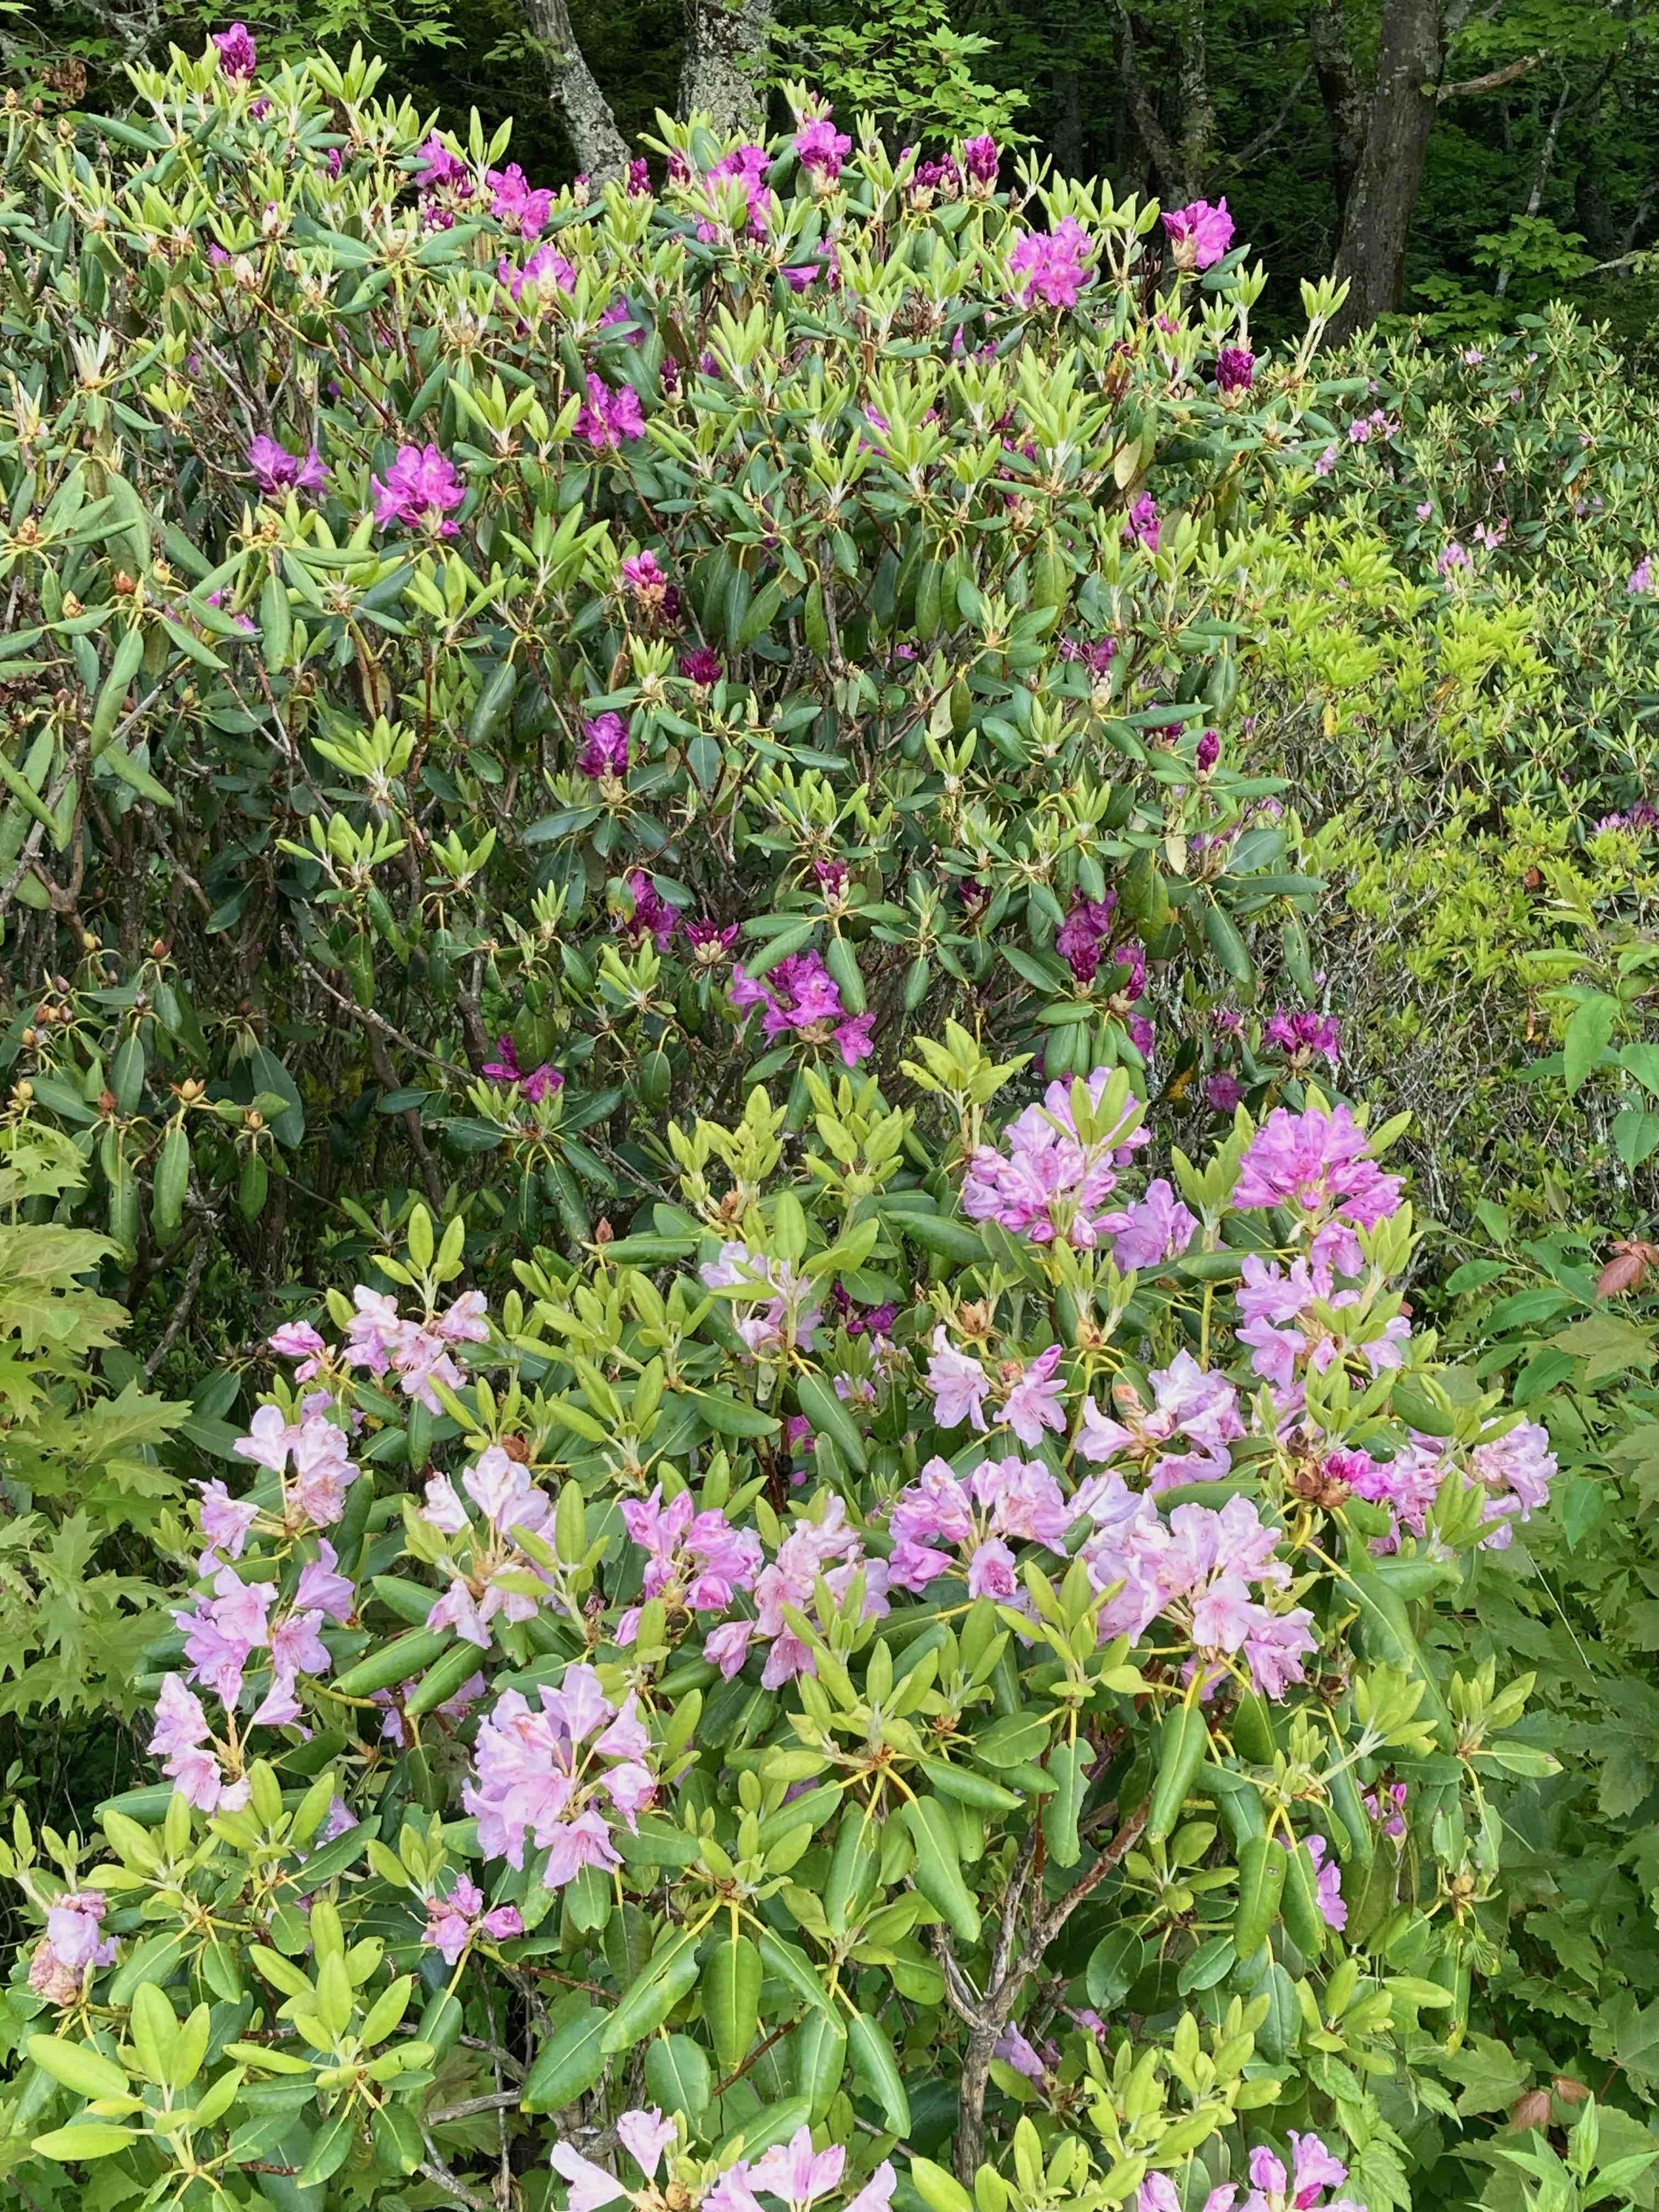 The Scientific Name is Rhododendron catawbiense. You will likely hear them called Catawba Rhododendron, Mountain Rosebay, Catawba Rosebay, Purple Rhododendron, Purple Laurel, Rosebay Laurel, Pink Laurel. This picture shows the Variations in flower color. of Rhododendron catawbiense